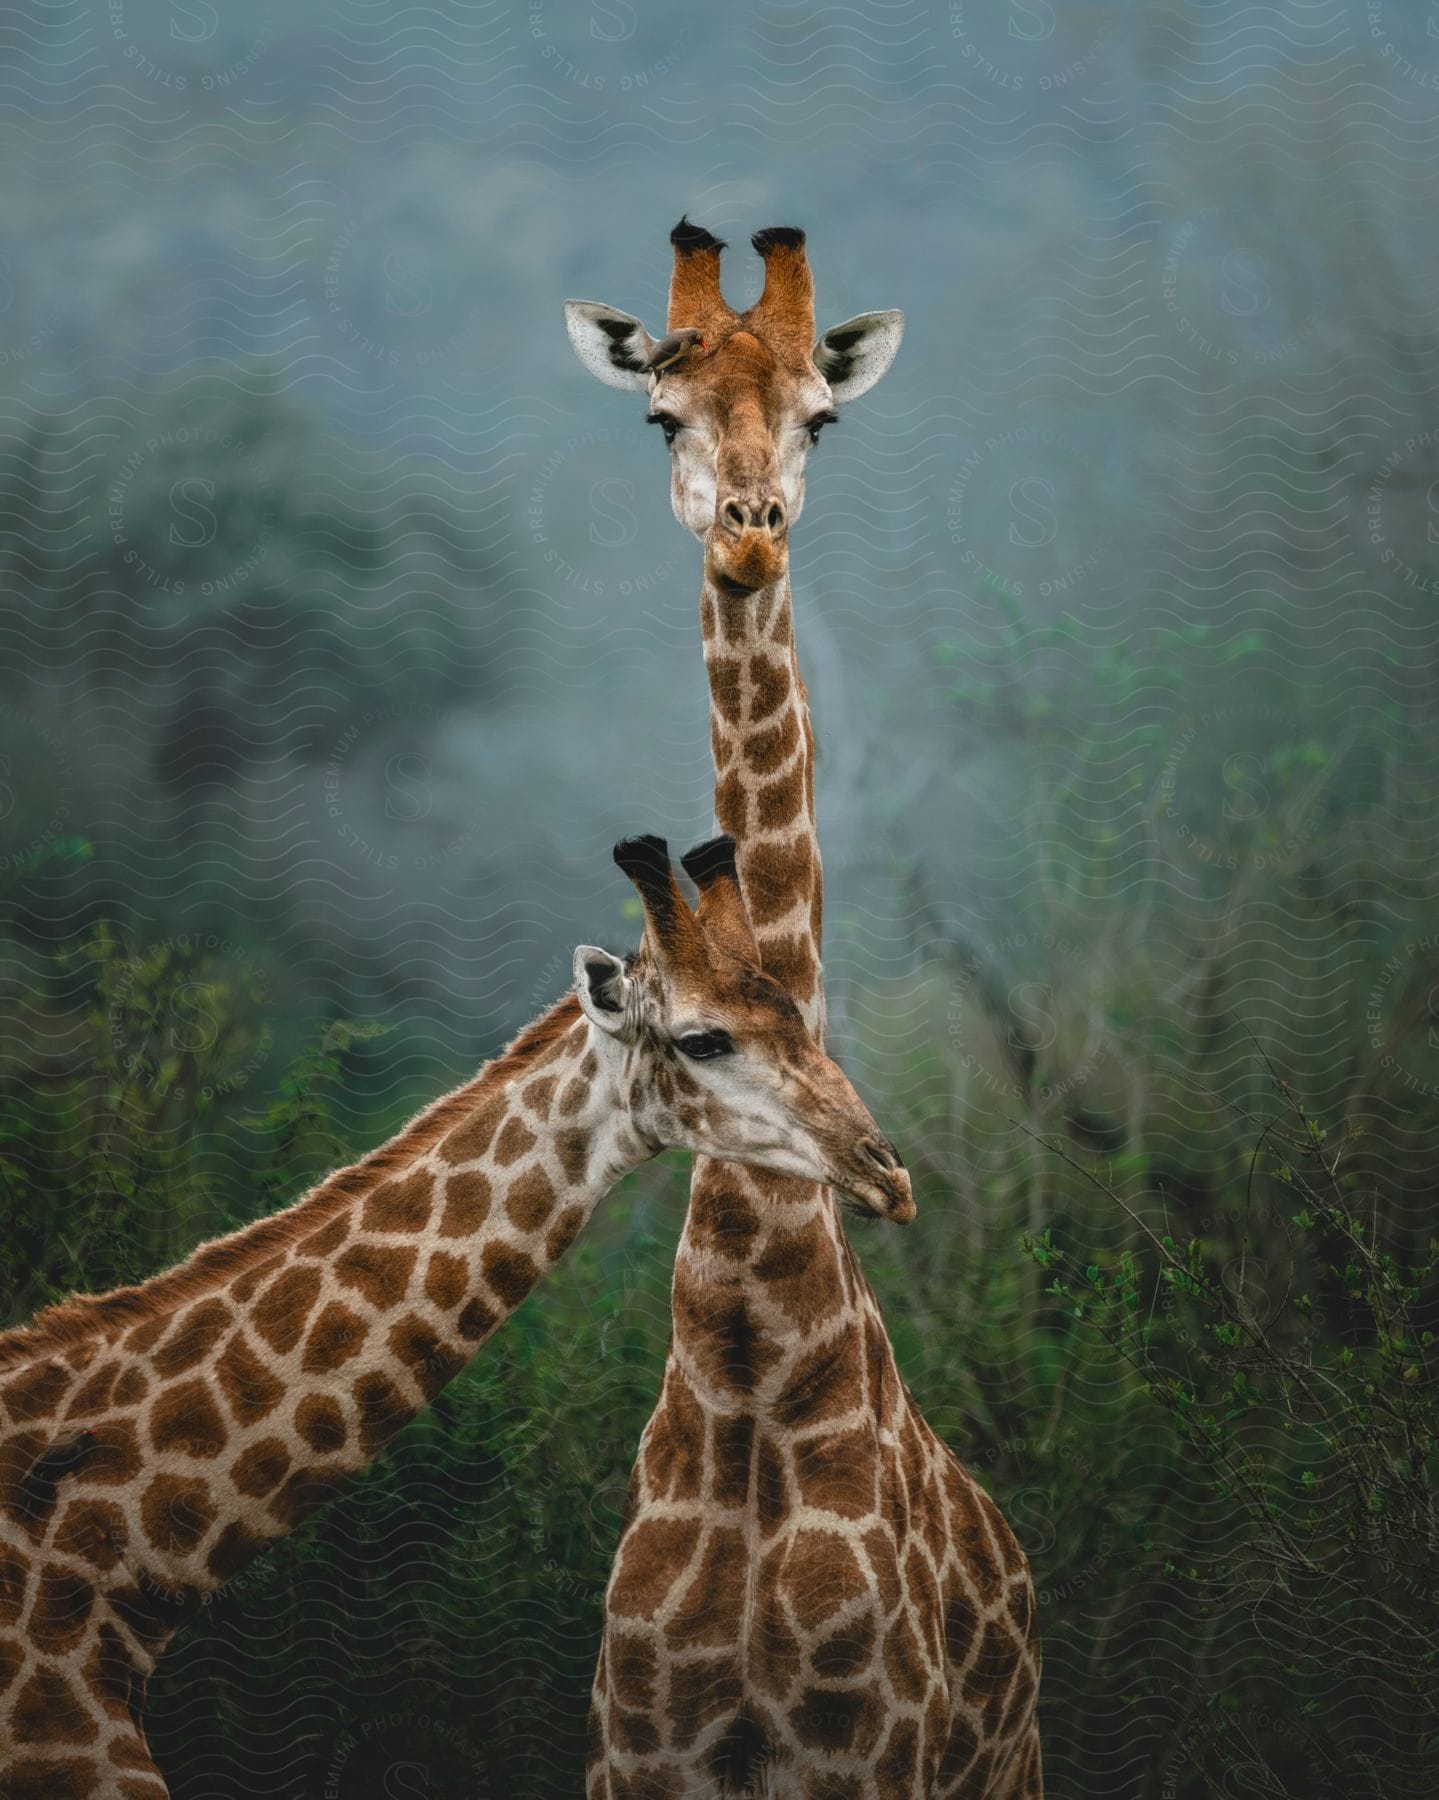 Two giraffes in the safari, one standing in front of the other at neck height.